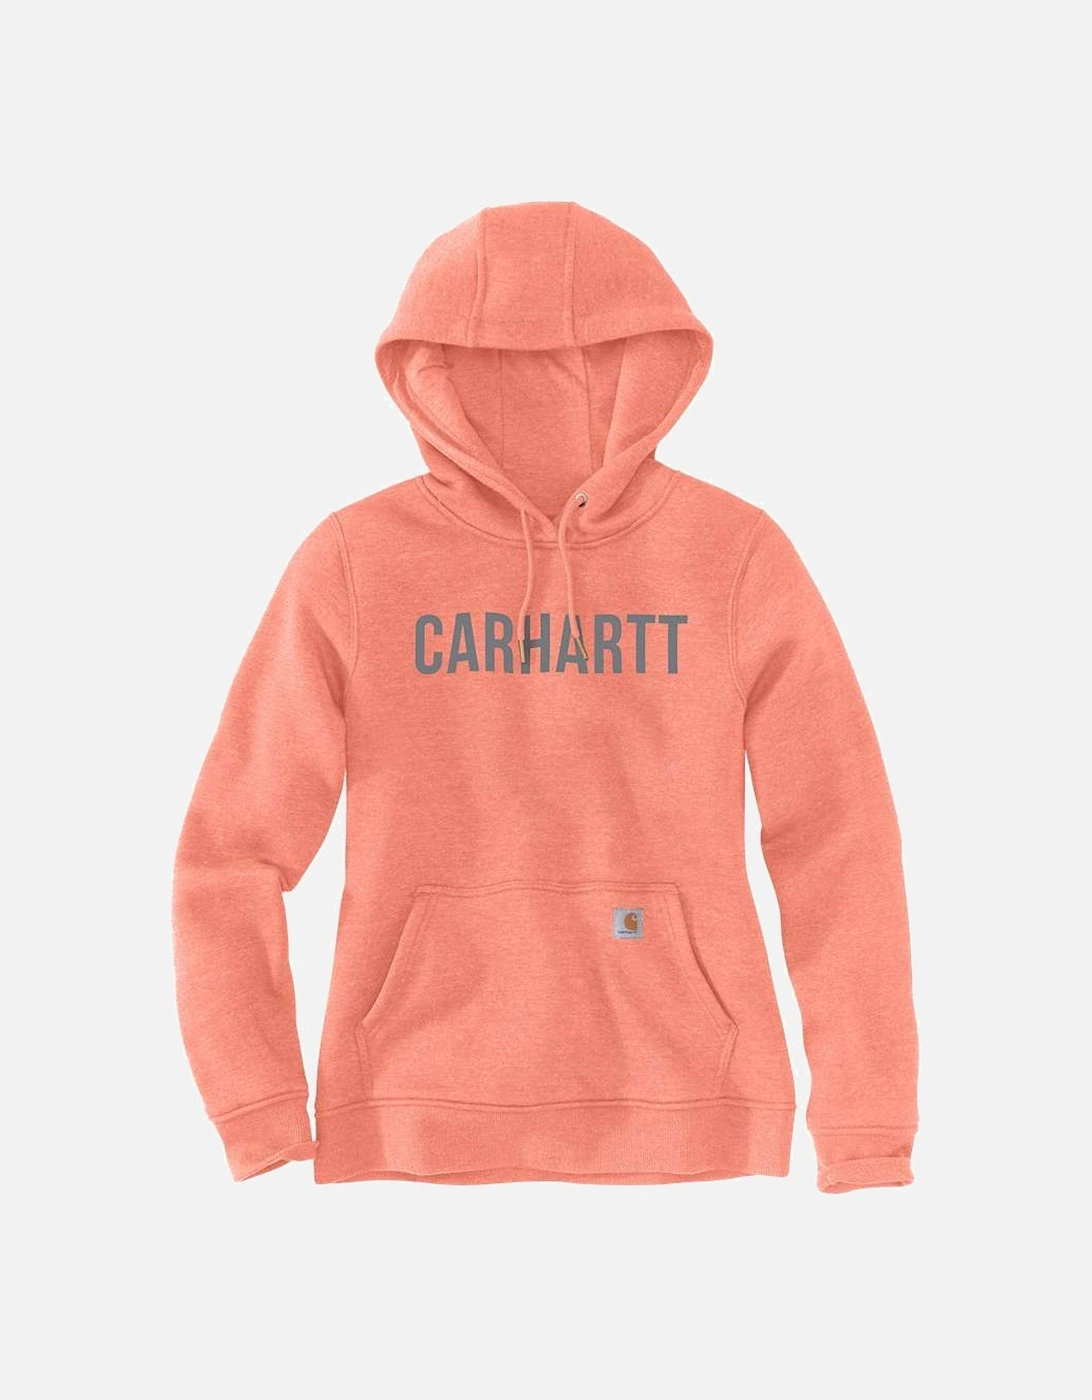 Carhartt Womens Midweight Relaxed Fit Graphic Sweatshirt